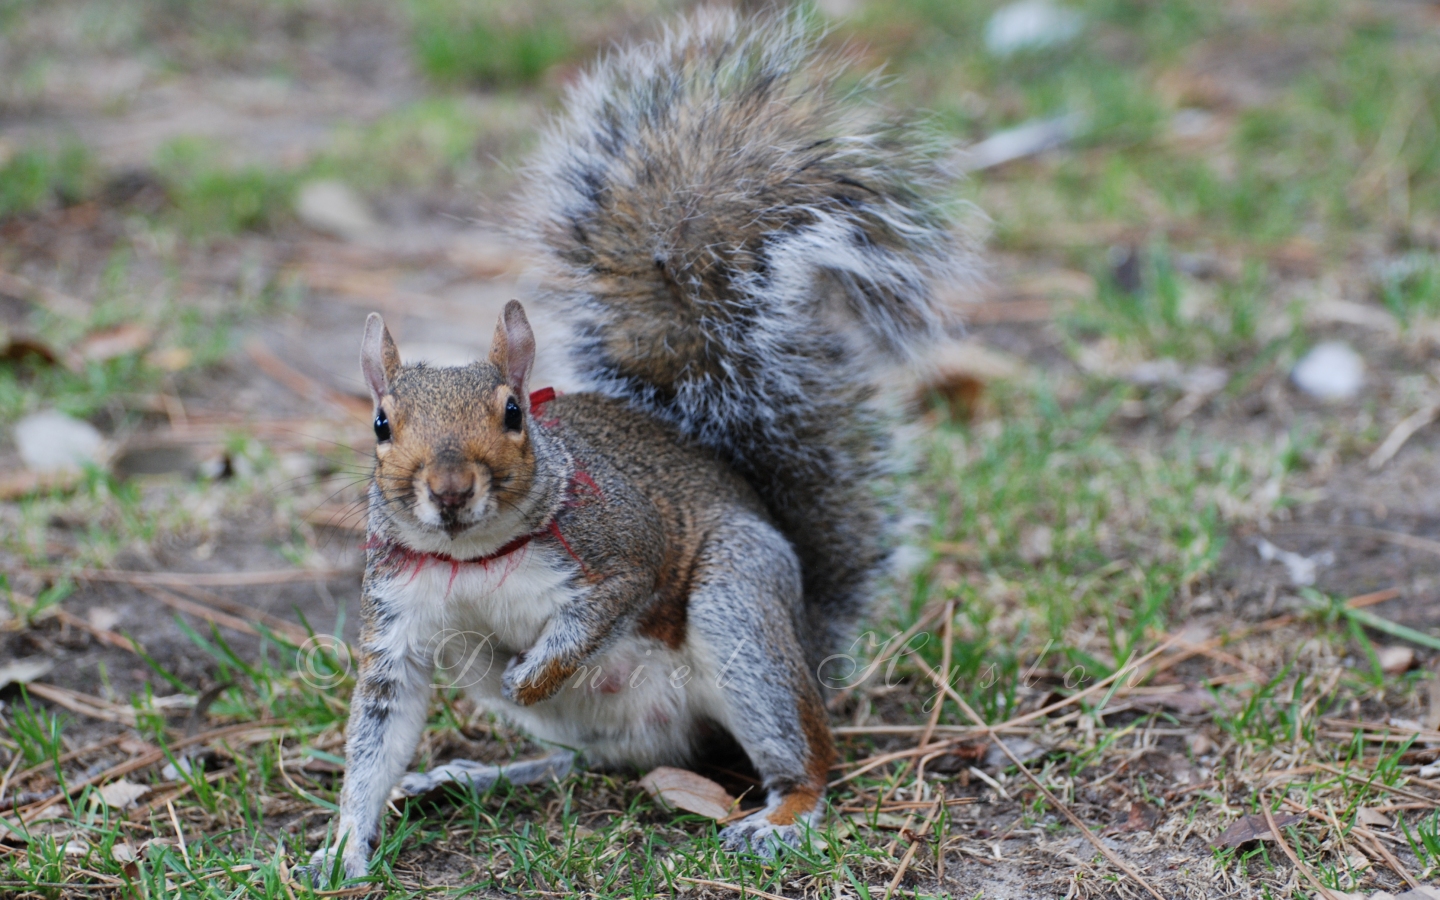 Collared Squirrel. by Rabid-Coot on DeviantArt